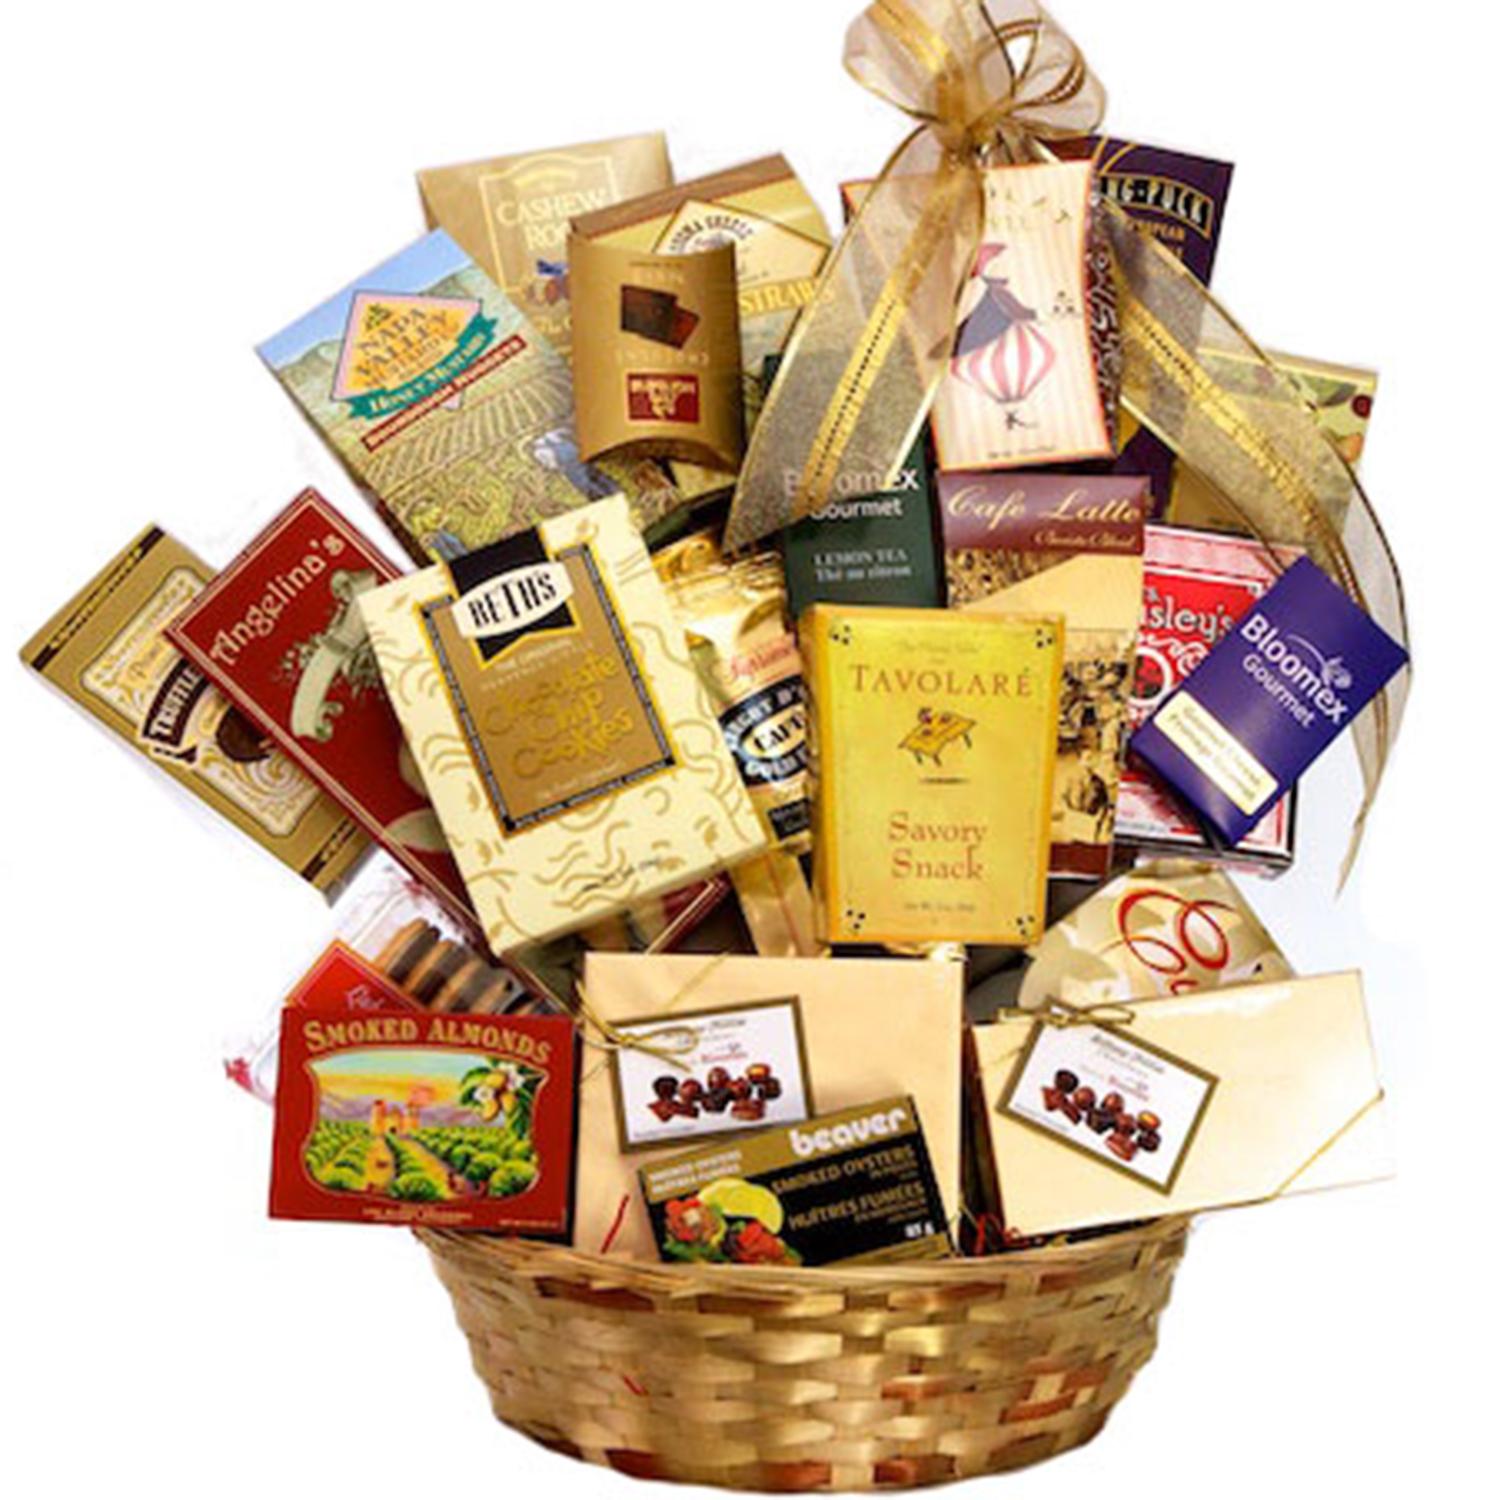 Aggregate 81+ salty snack gift baskets latest